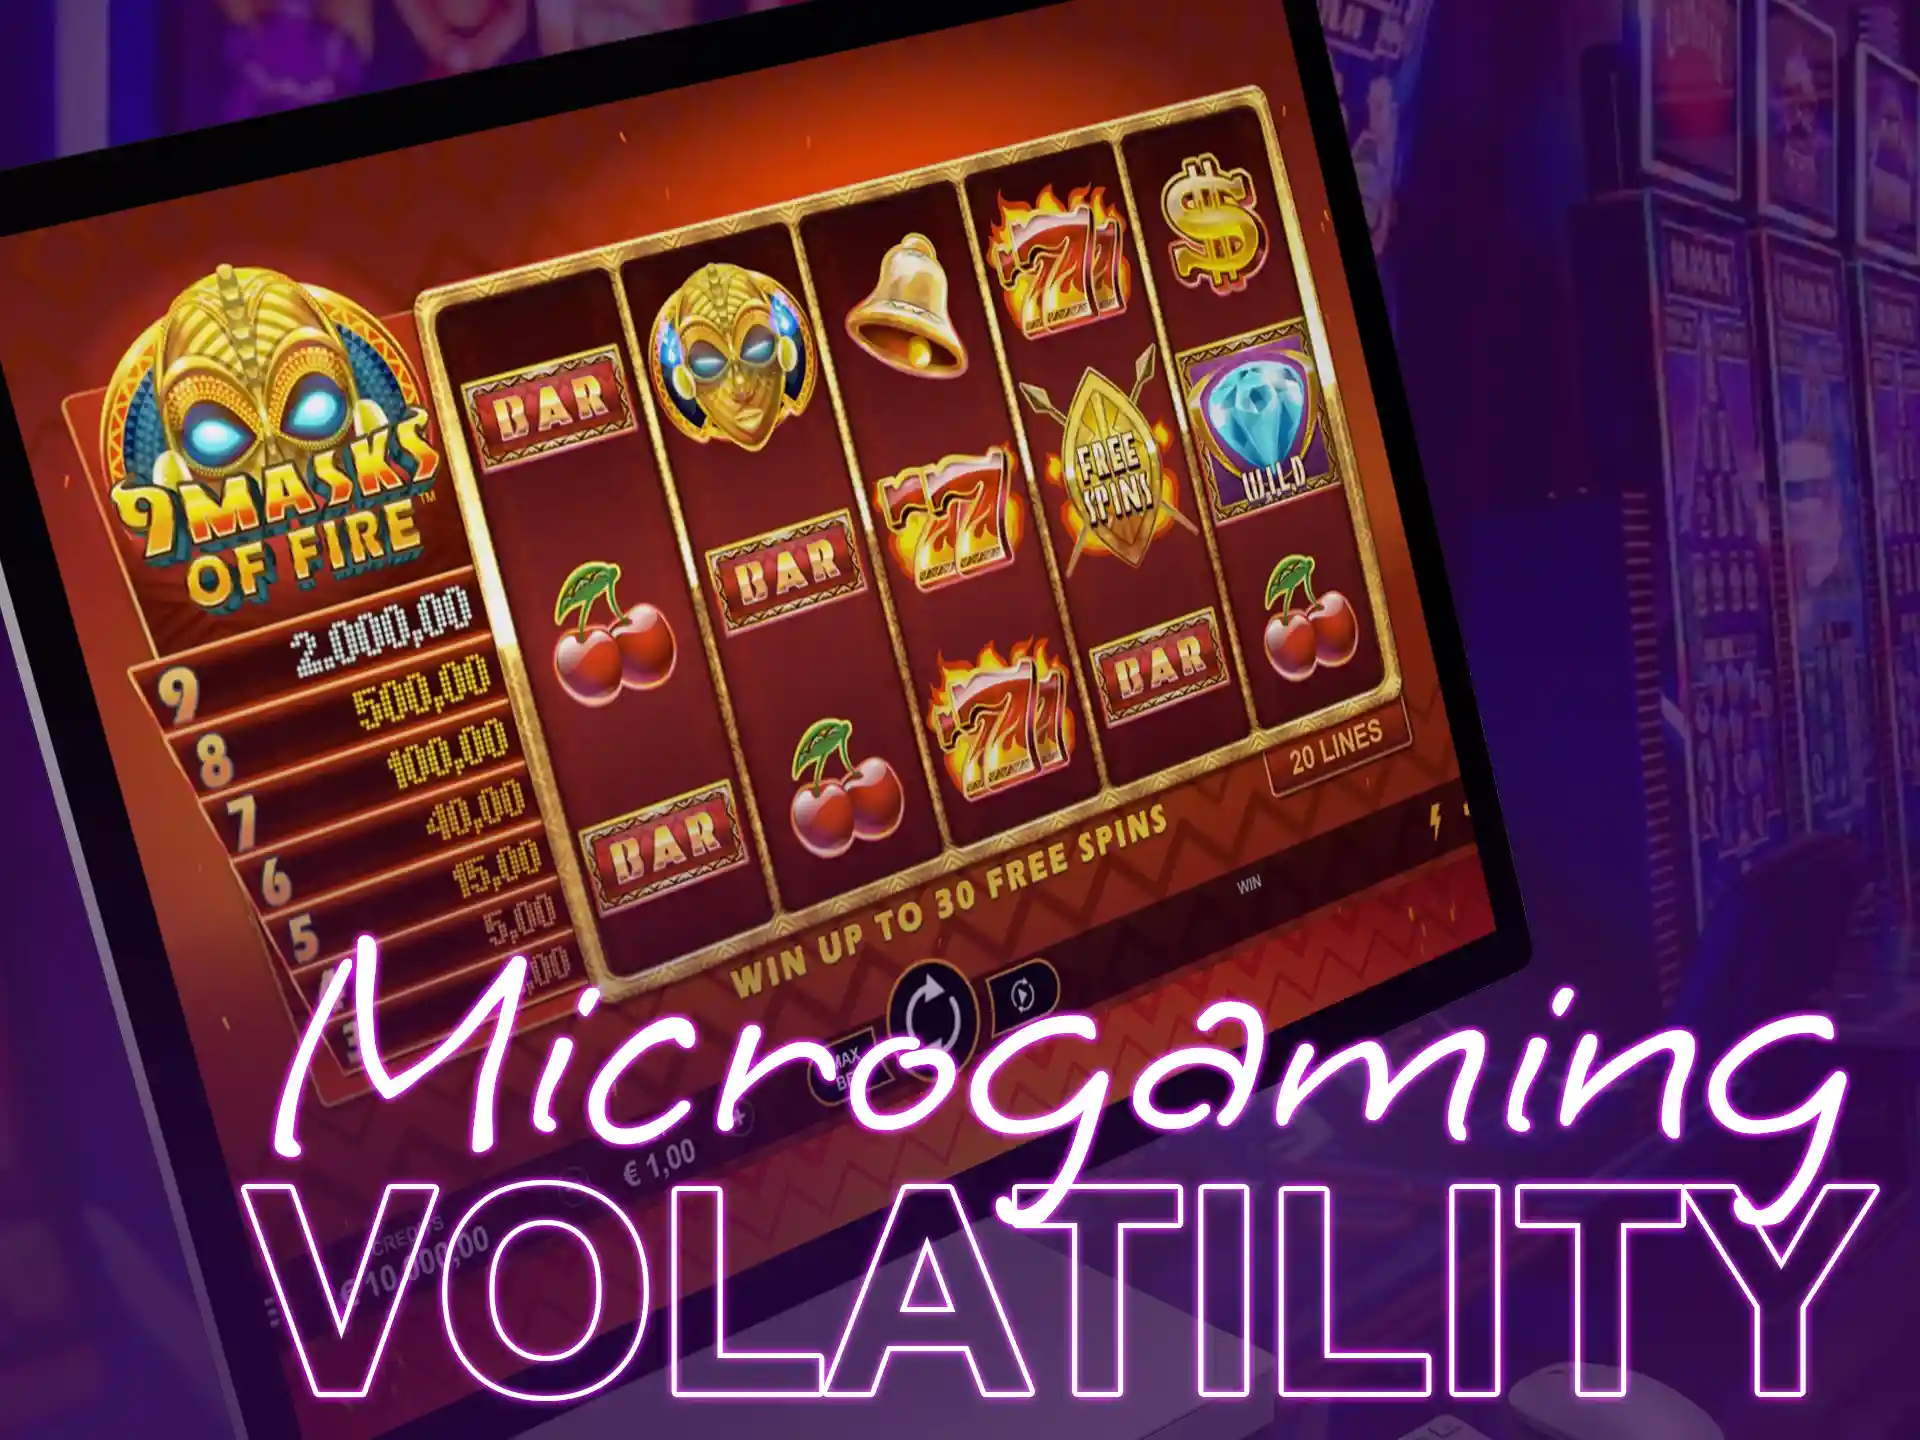 Microgaming's high volatility slots are 9 Masks of Fire and Immortal Romance.